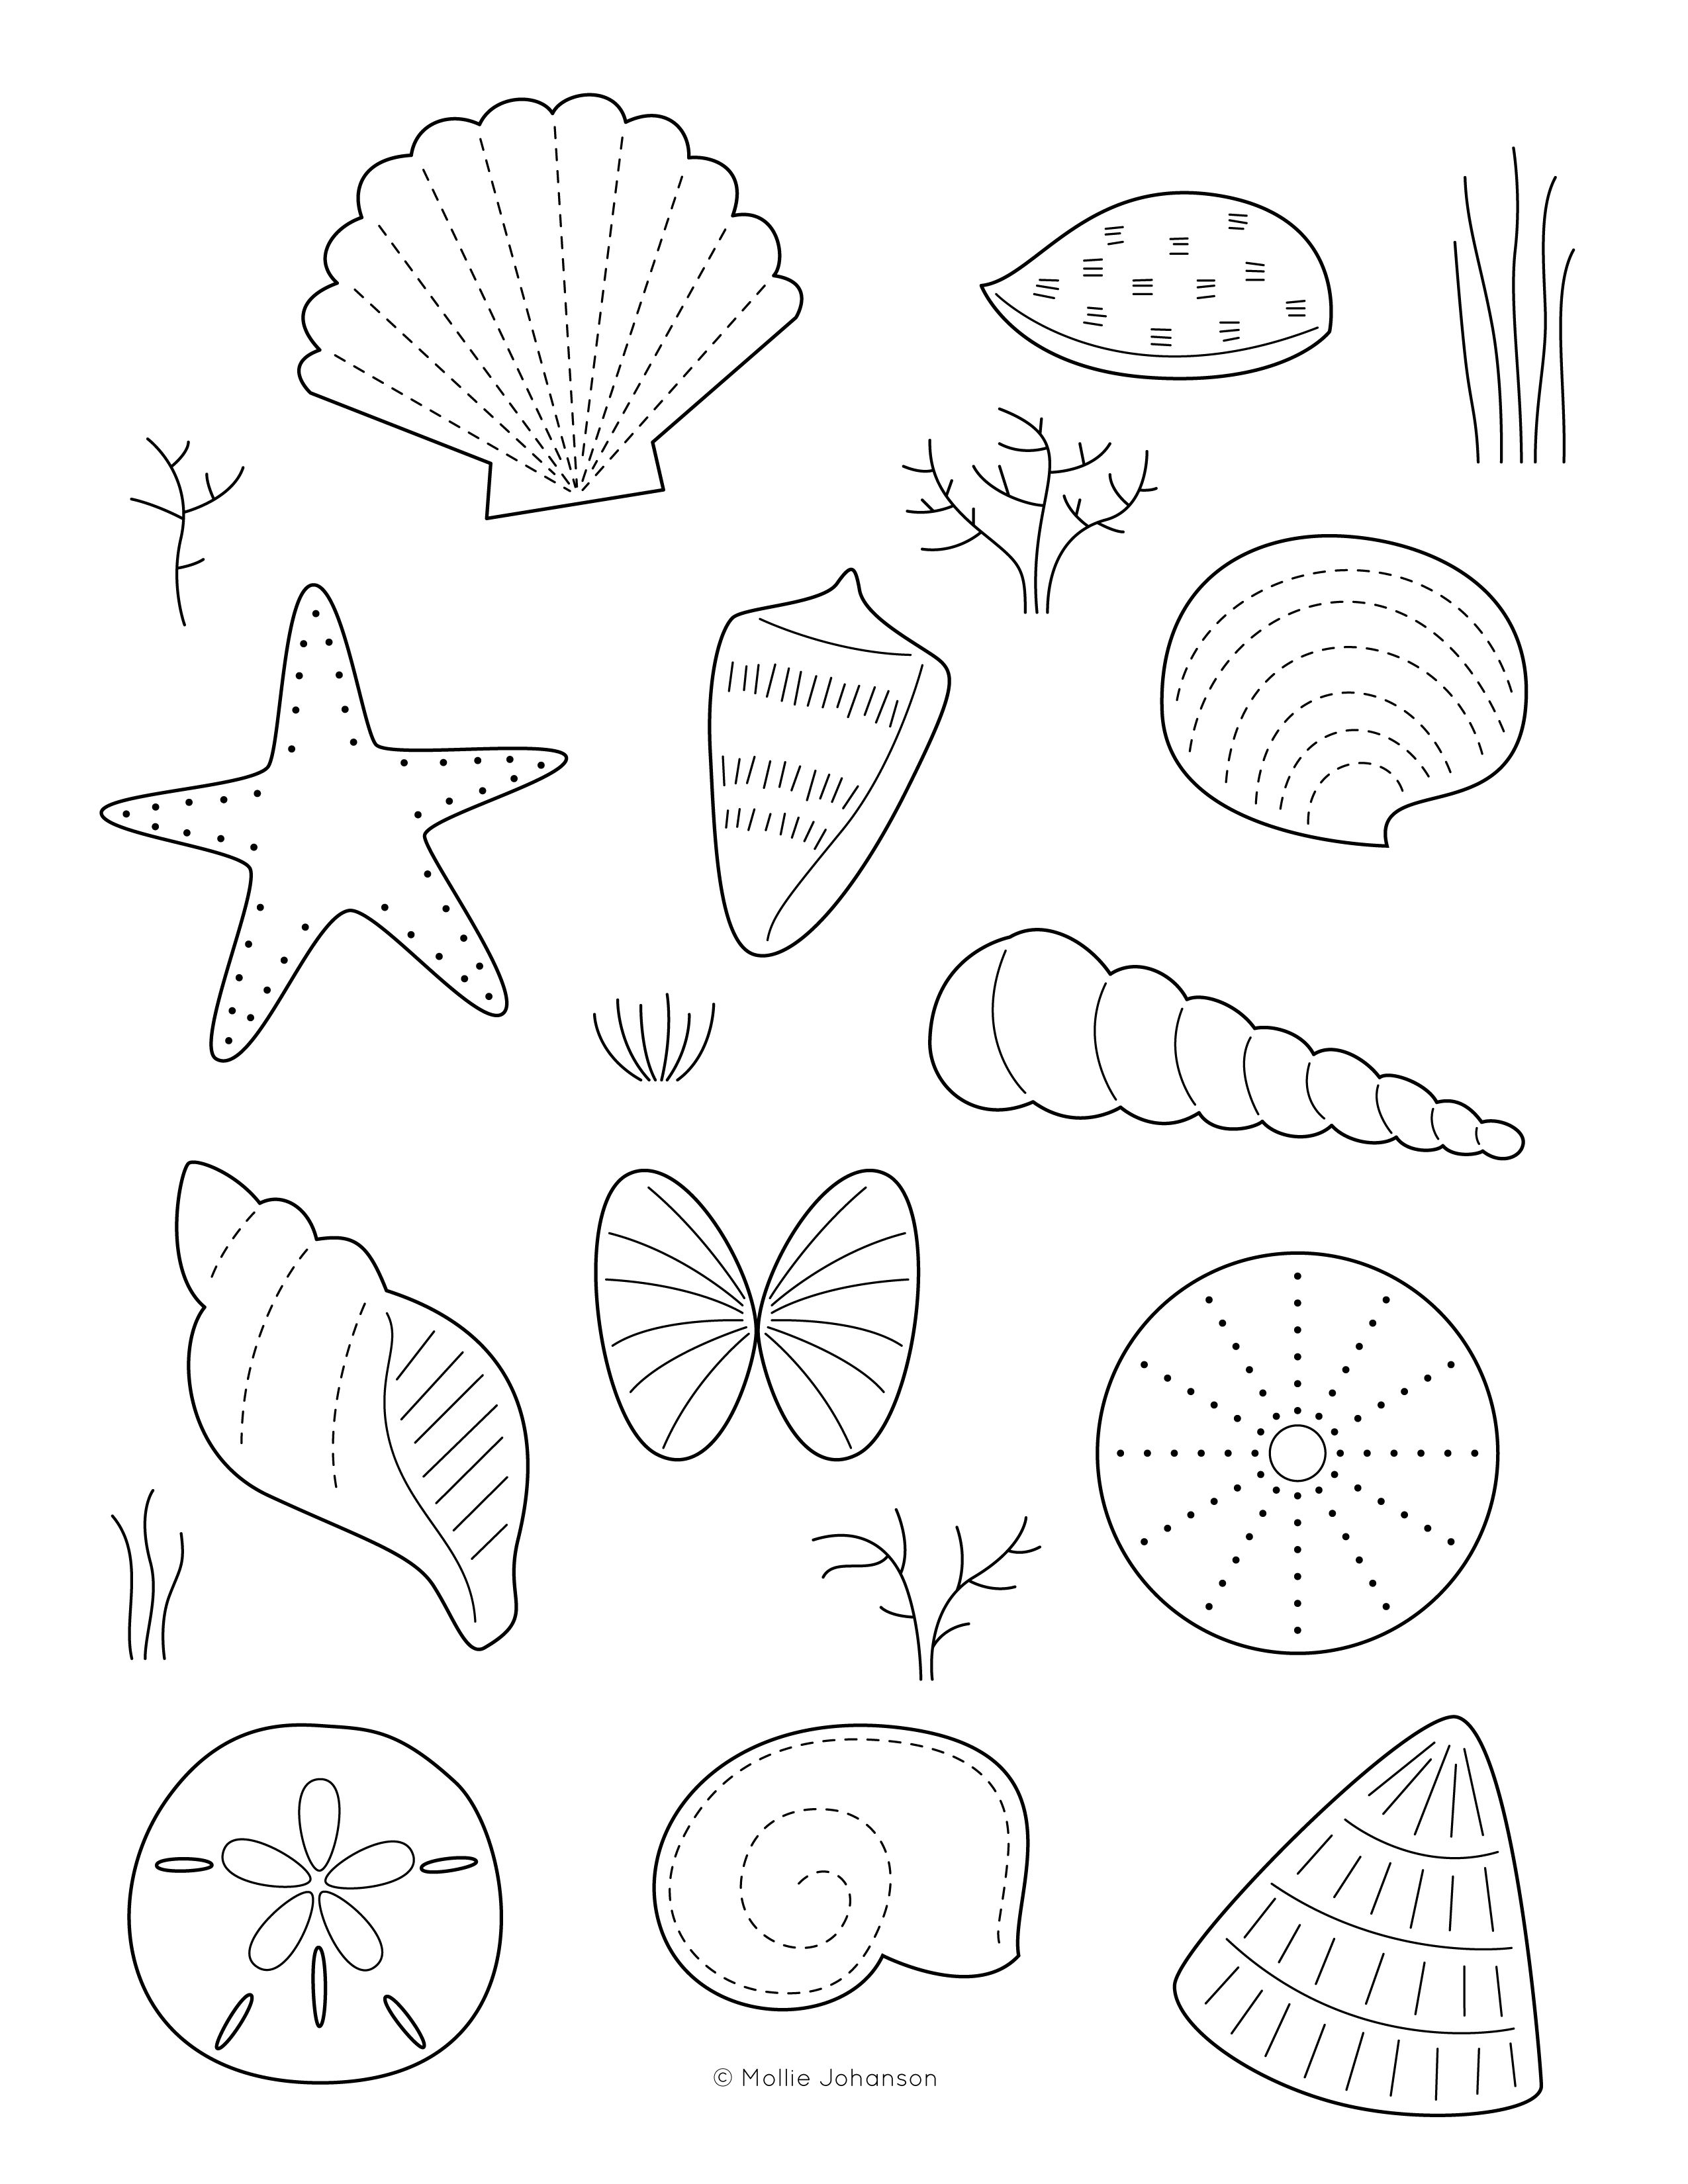 Snowflake Embroidery Pattern Free Seashell Applique And Embroidery Patterns